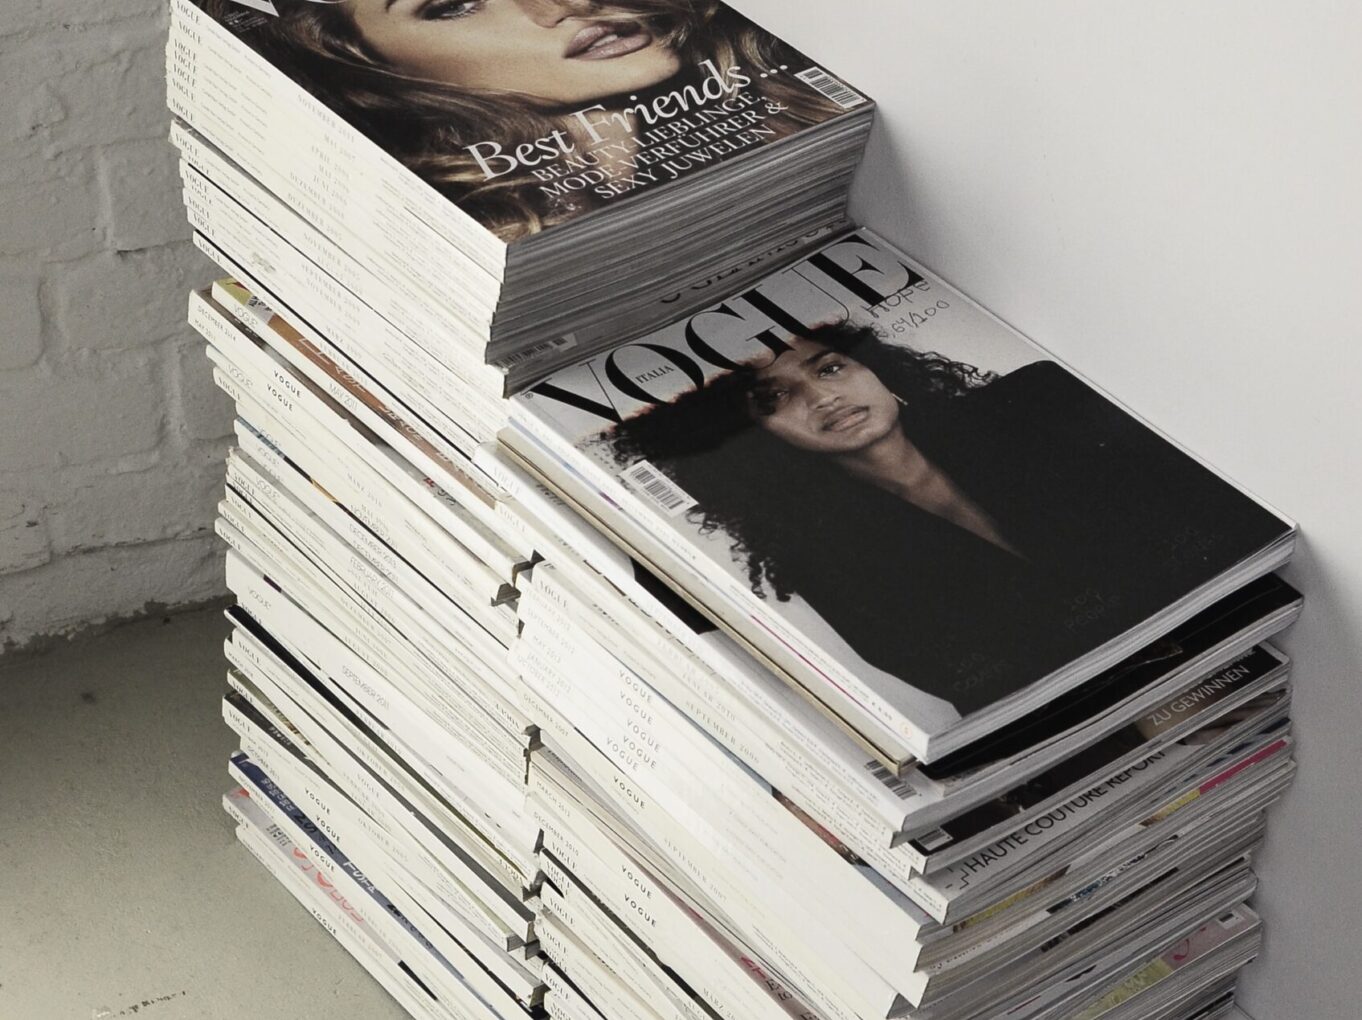 High angle many fashion magazines stacked on floor against white brick wall in studio